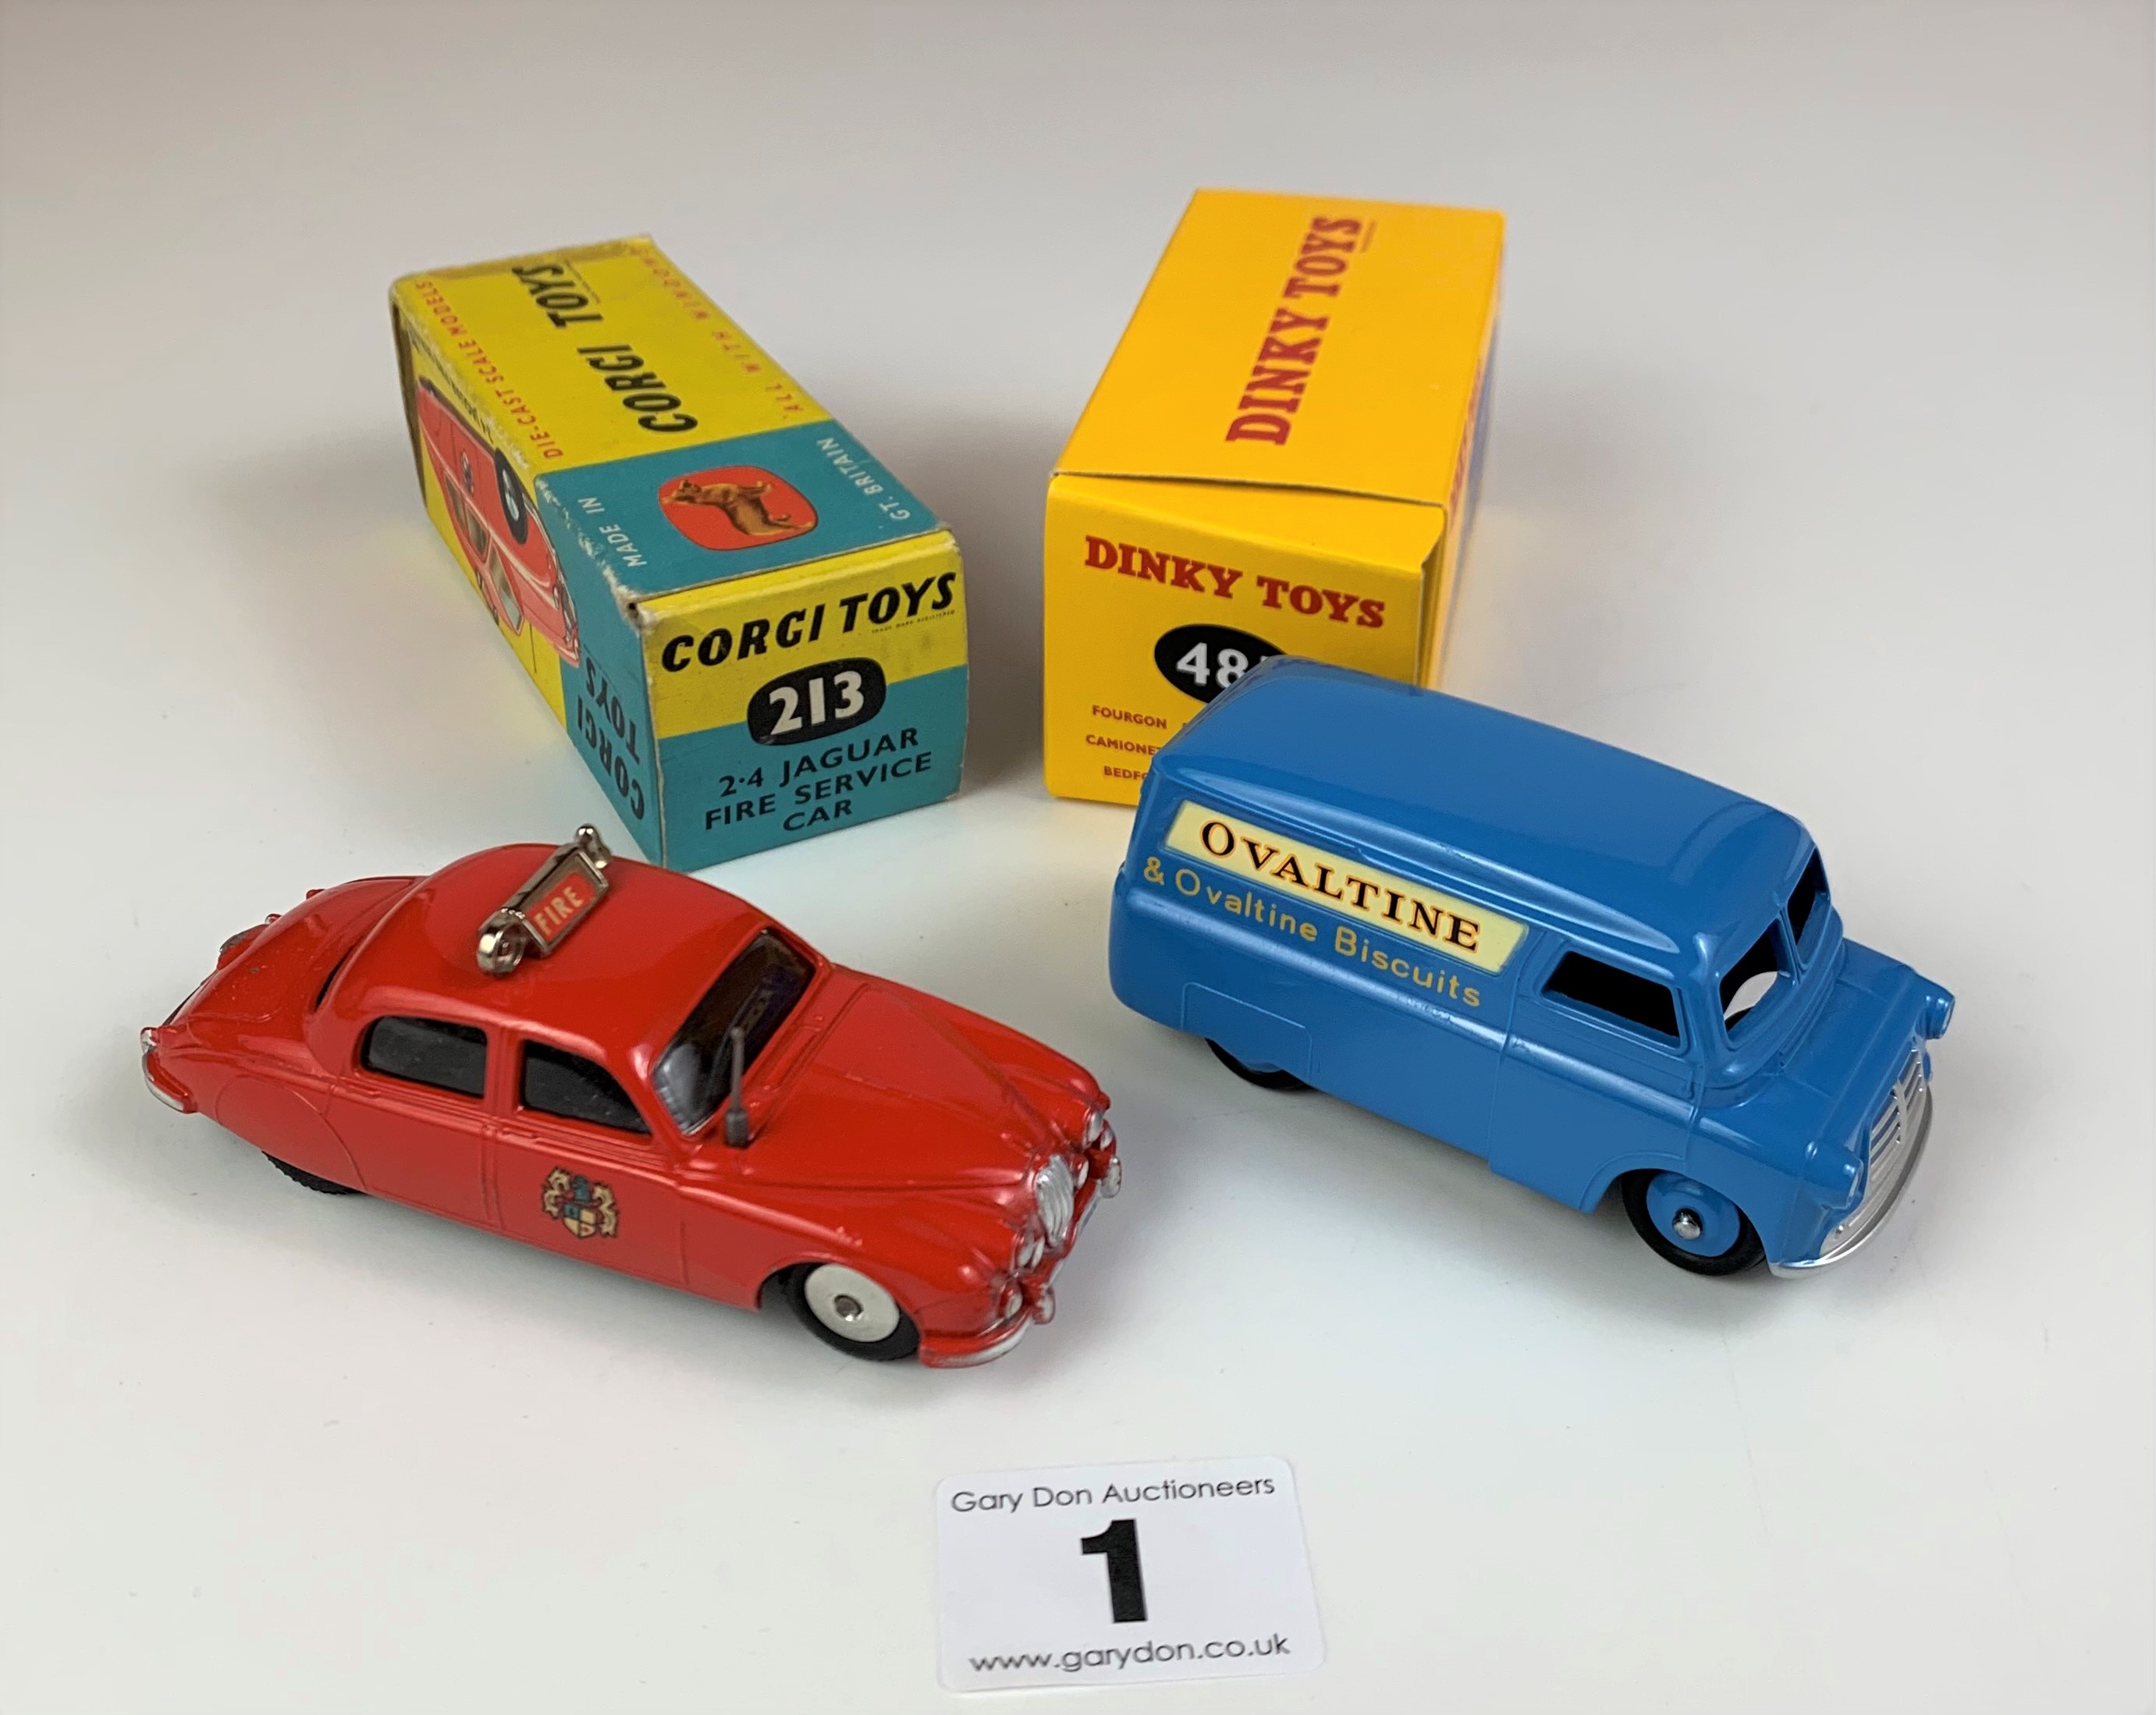 Boxed Dinky Toys 481 Bedford 10 CWT Van ‘Ovaltine’ and boxed Corgi Toys 213 2.4 Jaguar Fire - Image 2 of 11